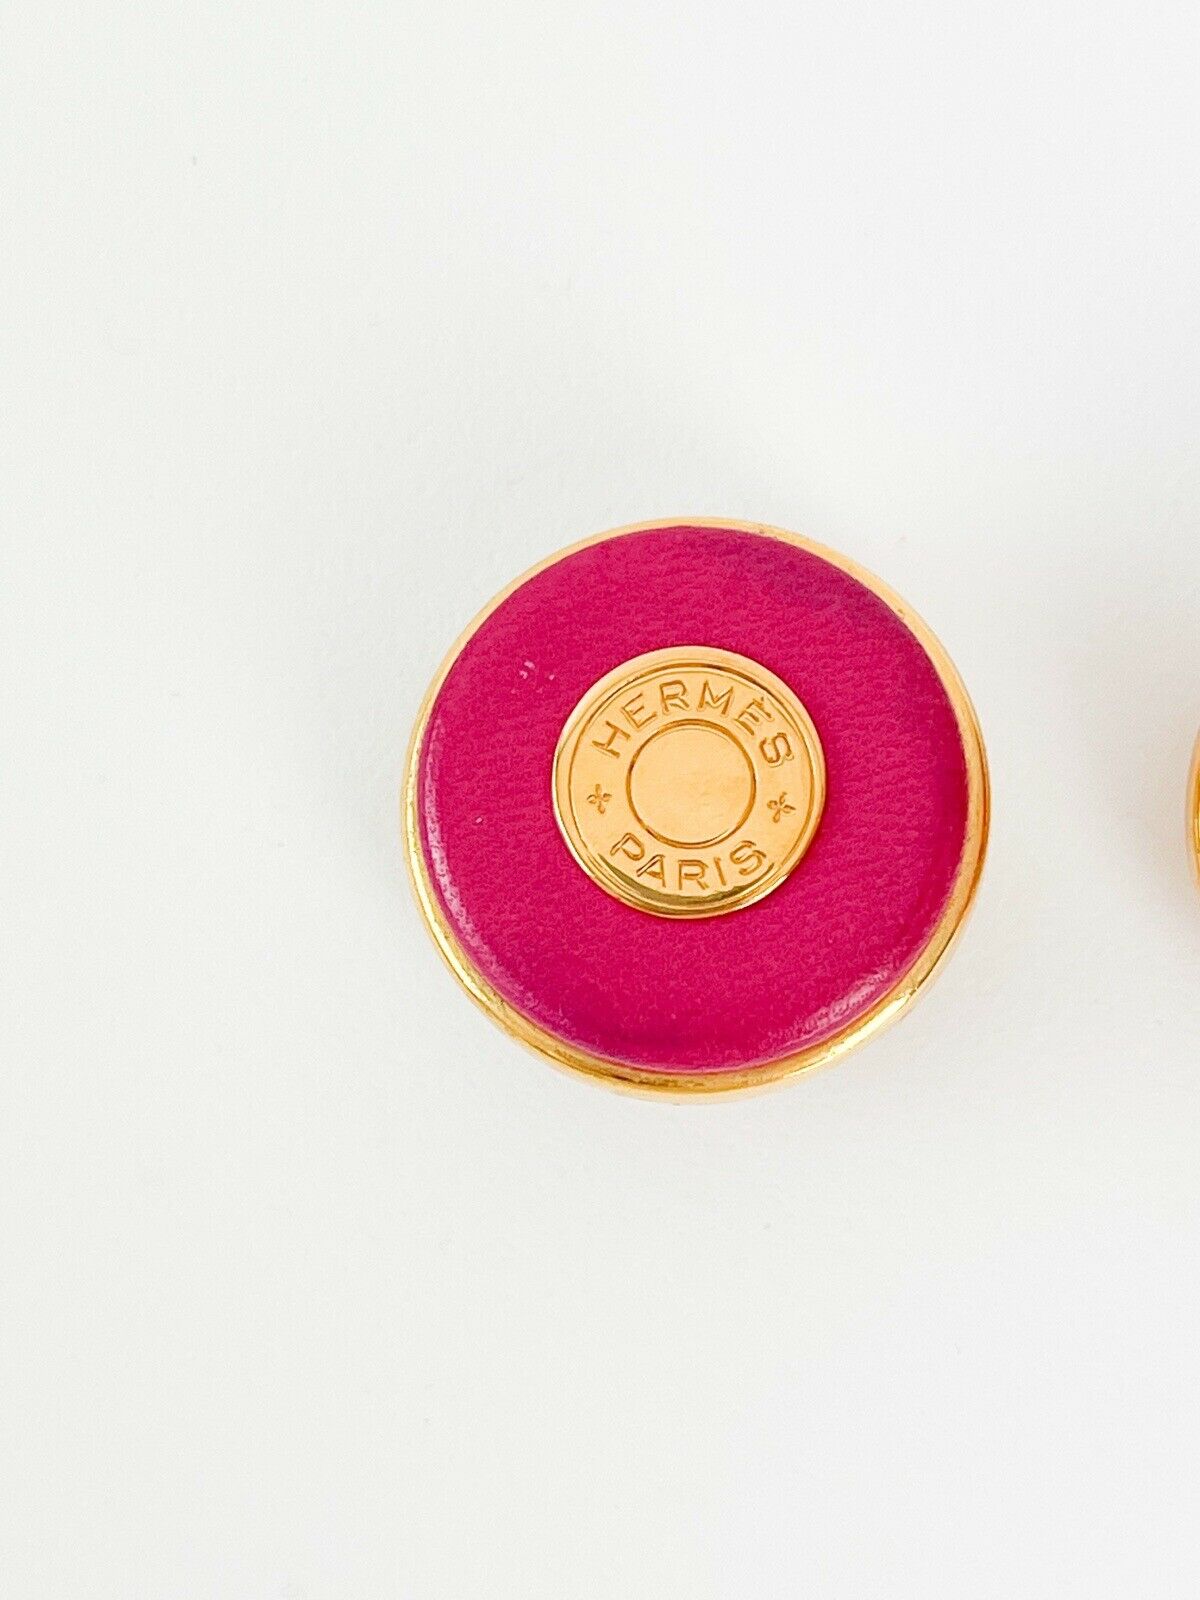 Hermes Paris Vintage Clip-On Earrings Round Leather Pink Gold Tone